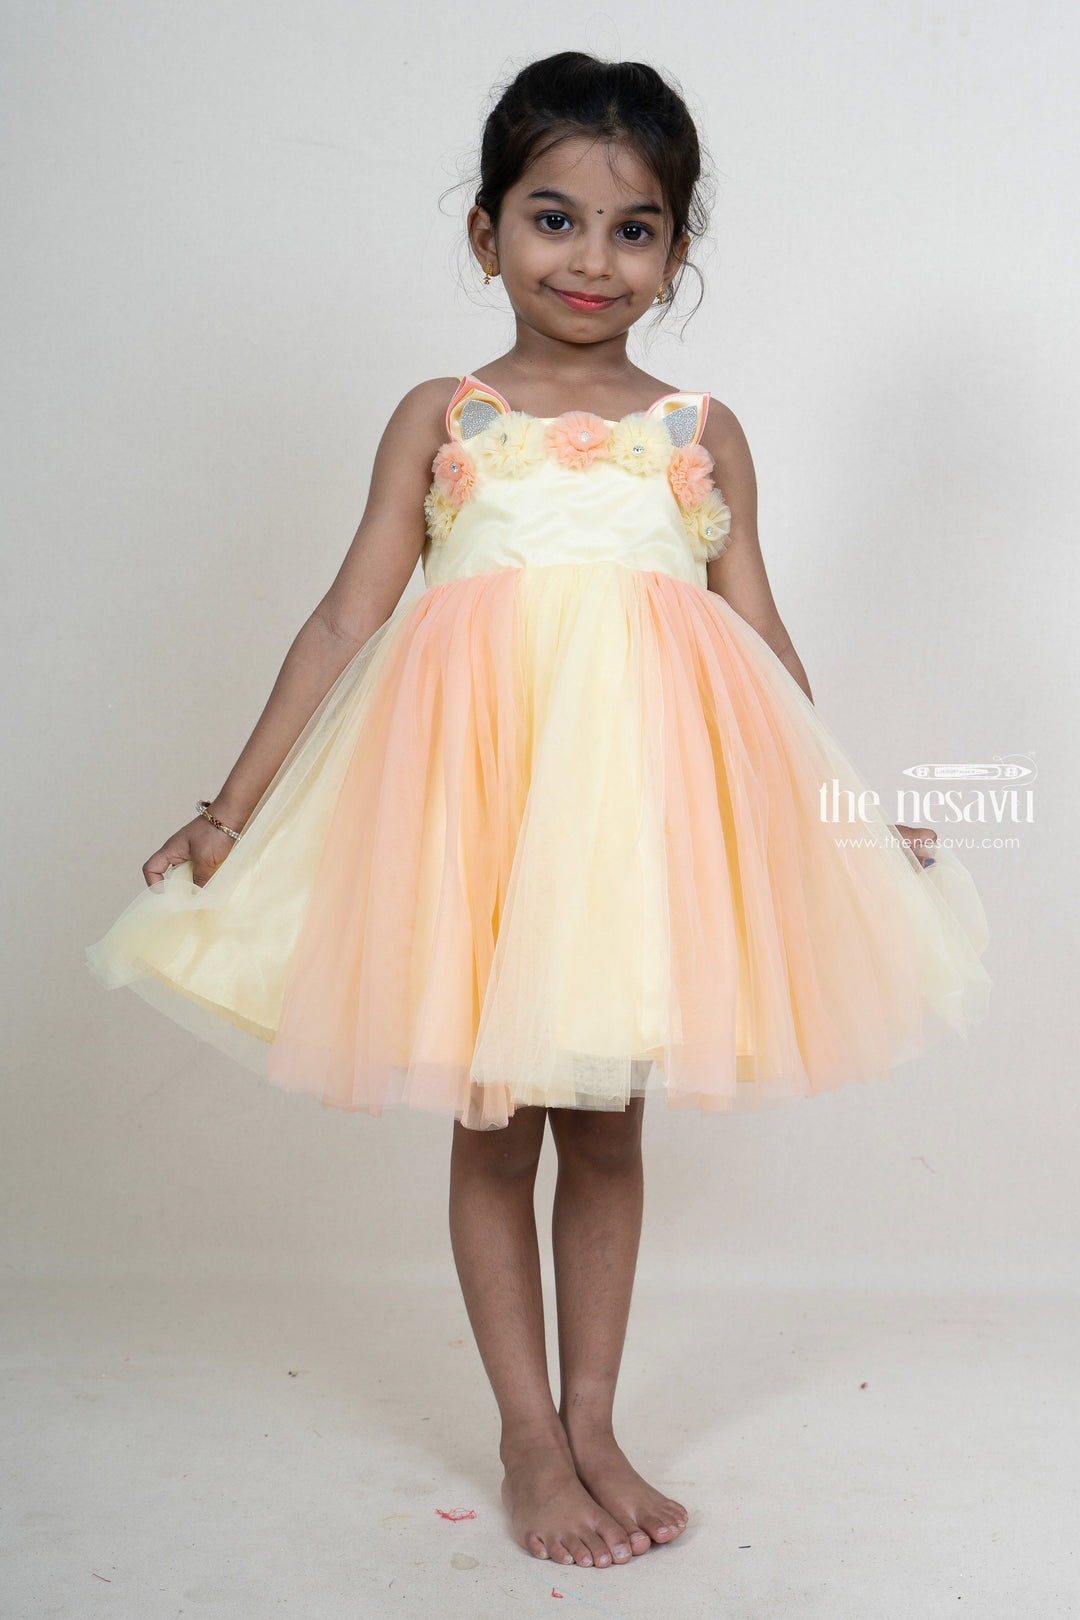 The Nesavu Party Frock Orange With Pink Pretty Party Wear For Girls With Floral Trims psr silks Nesavu